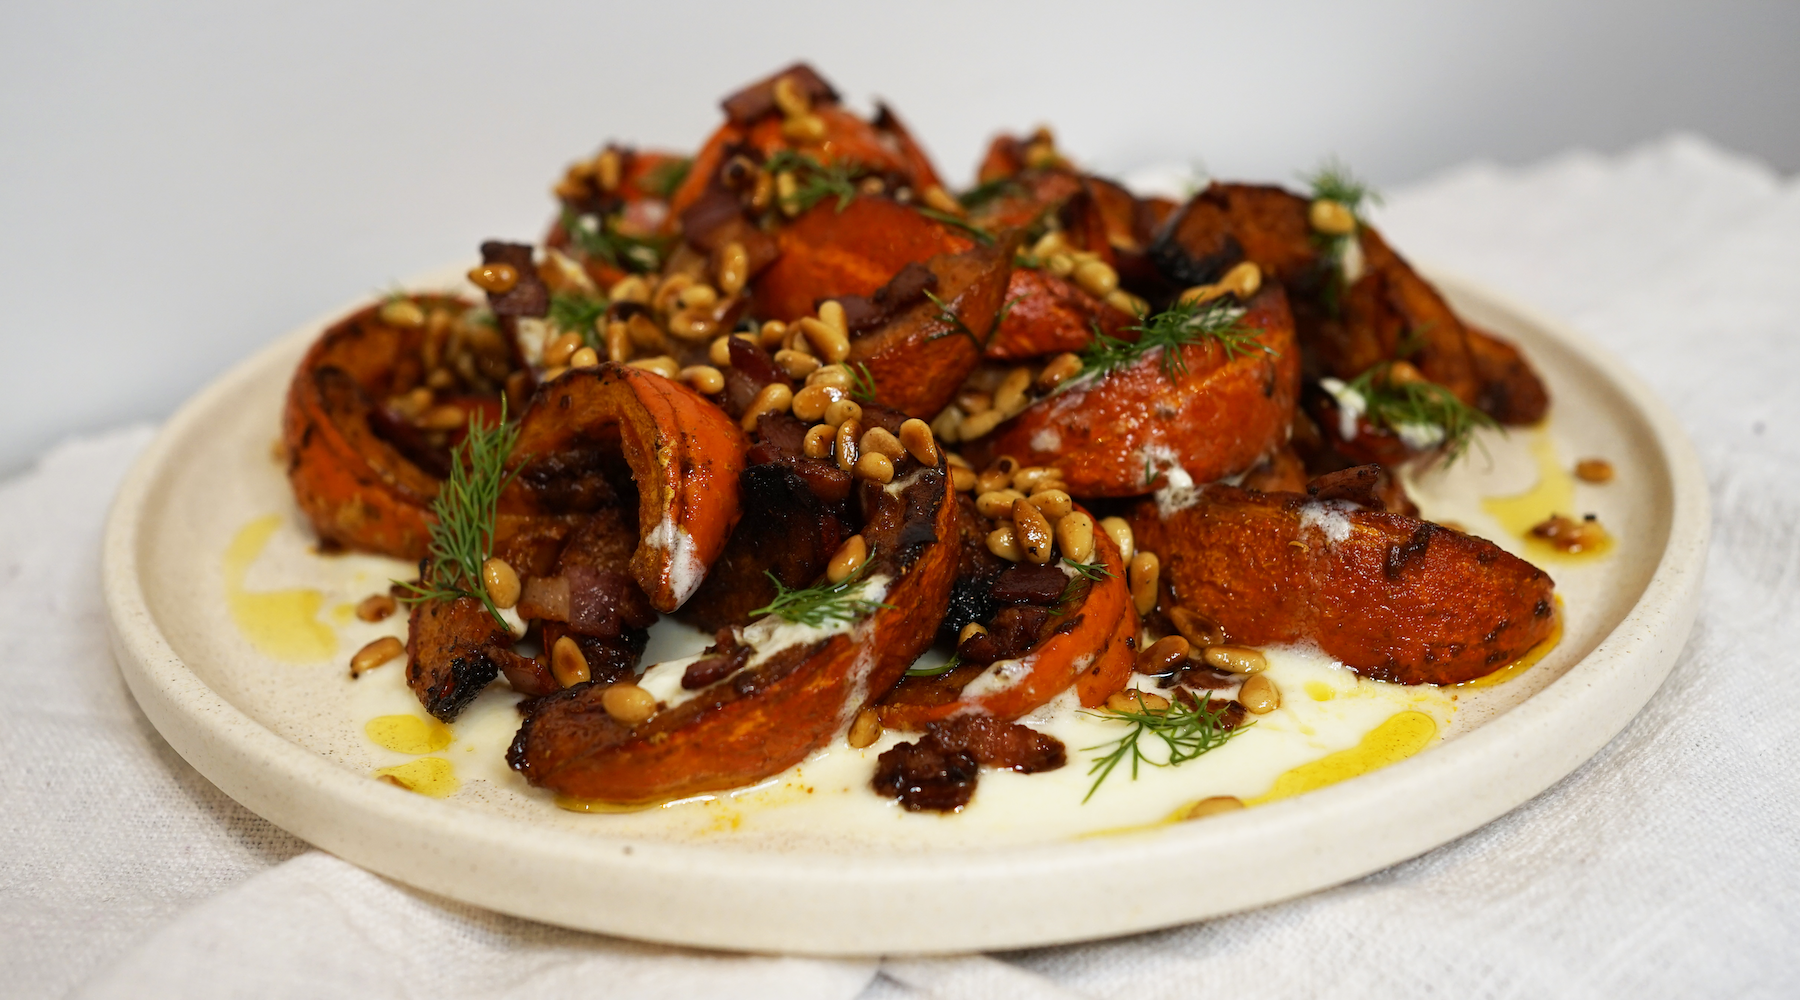 Roasted Pumpkin with Yoghurt and Streaky Bacon